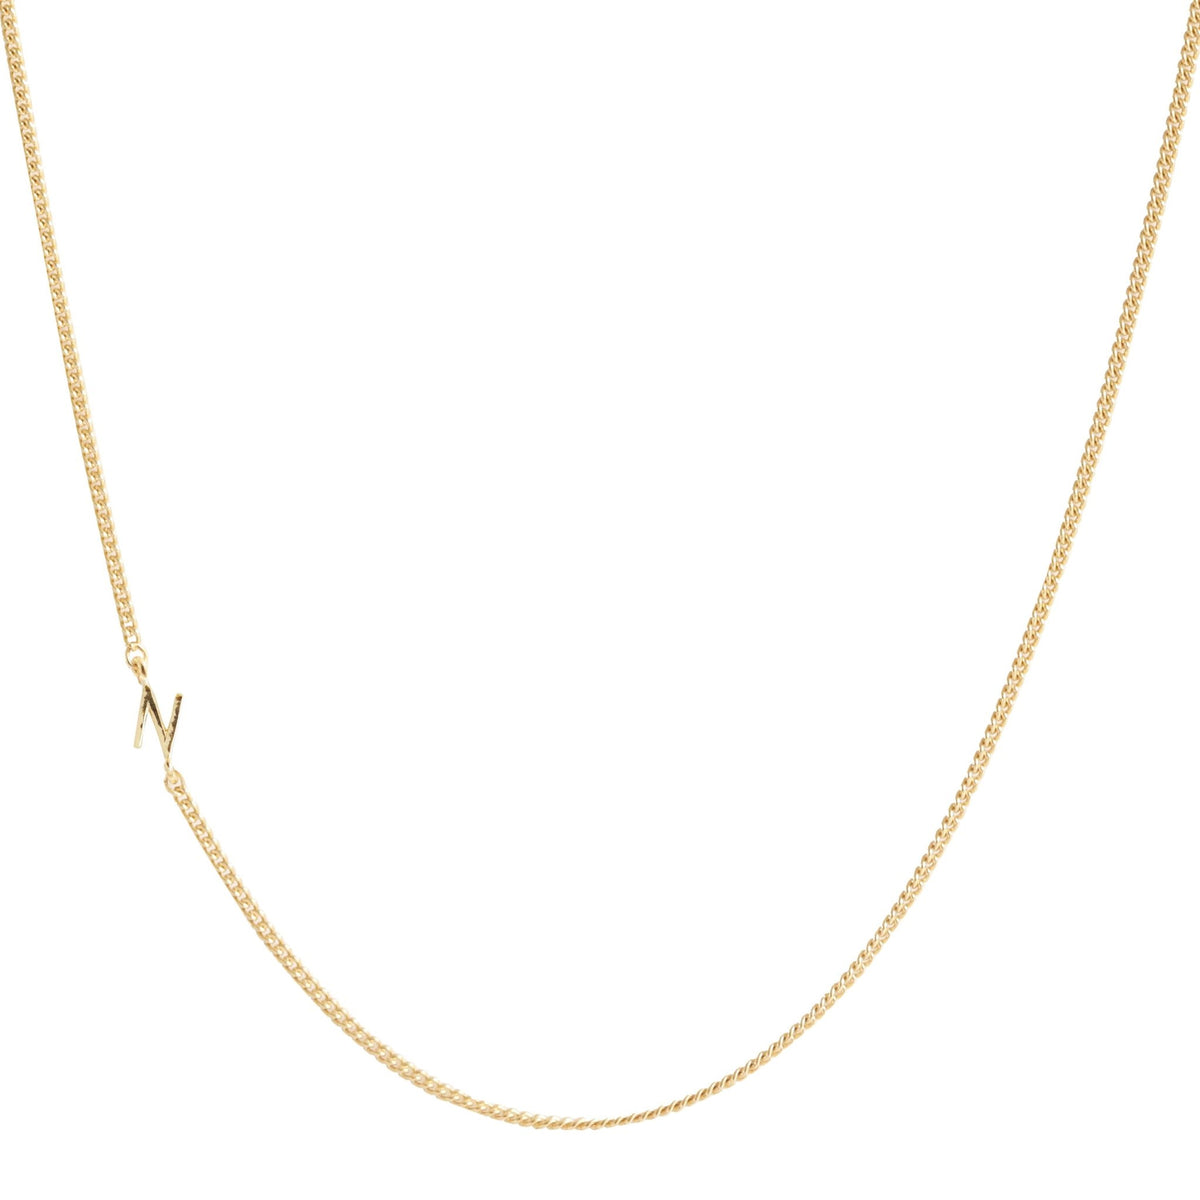 NOTABLE OFFSET INITIAL NECKLACE - N - GOLD - SO PRETTY CARA COTTER